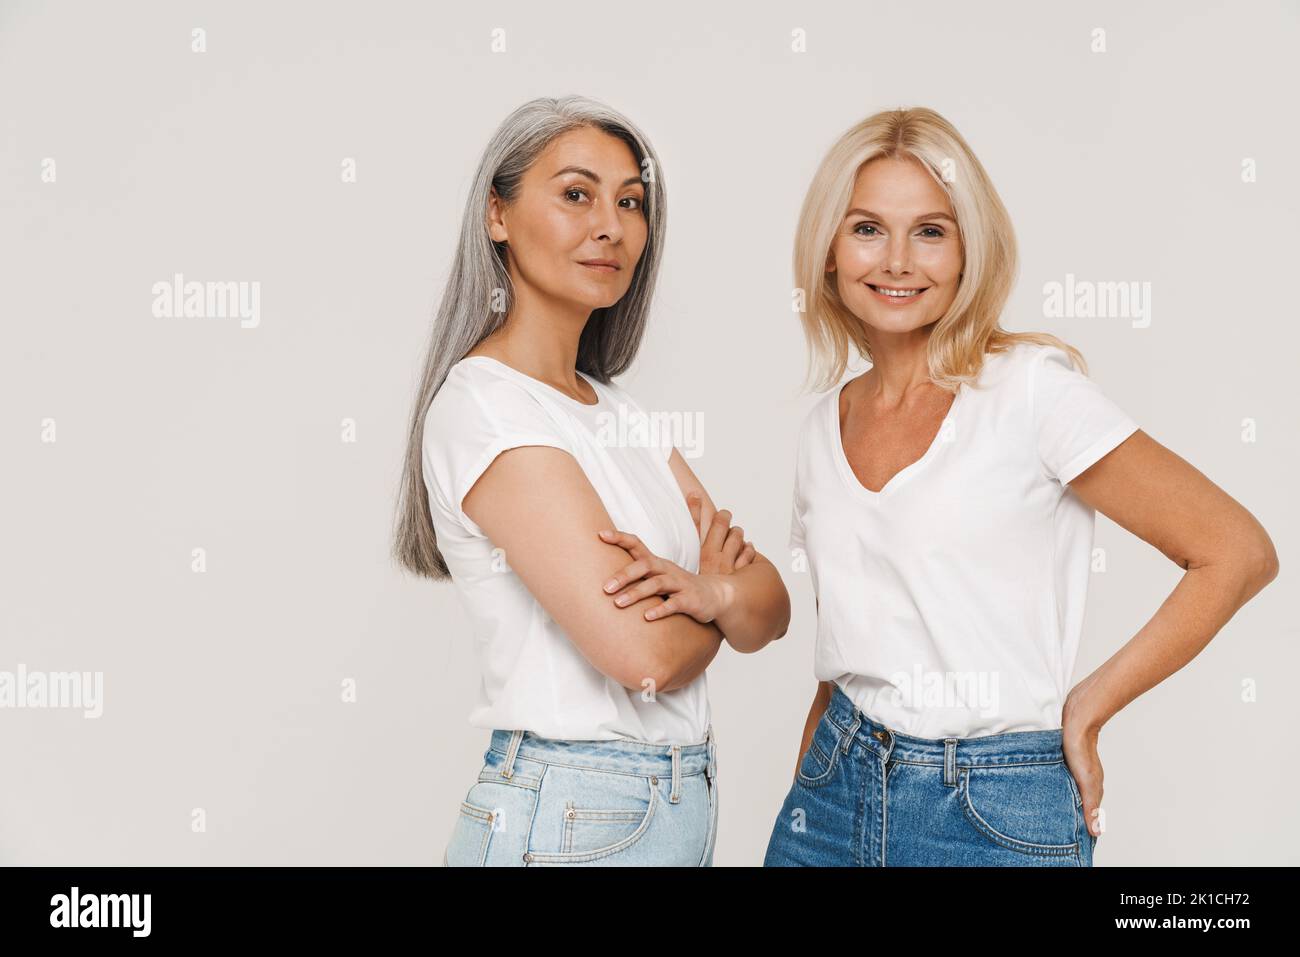 Mature multiracial women with gray hair wearing t-shirts posing at camera isolated over white background Stock Photo